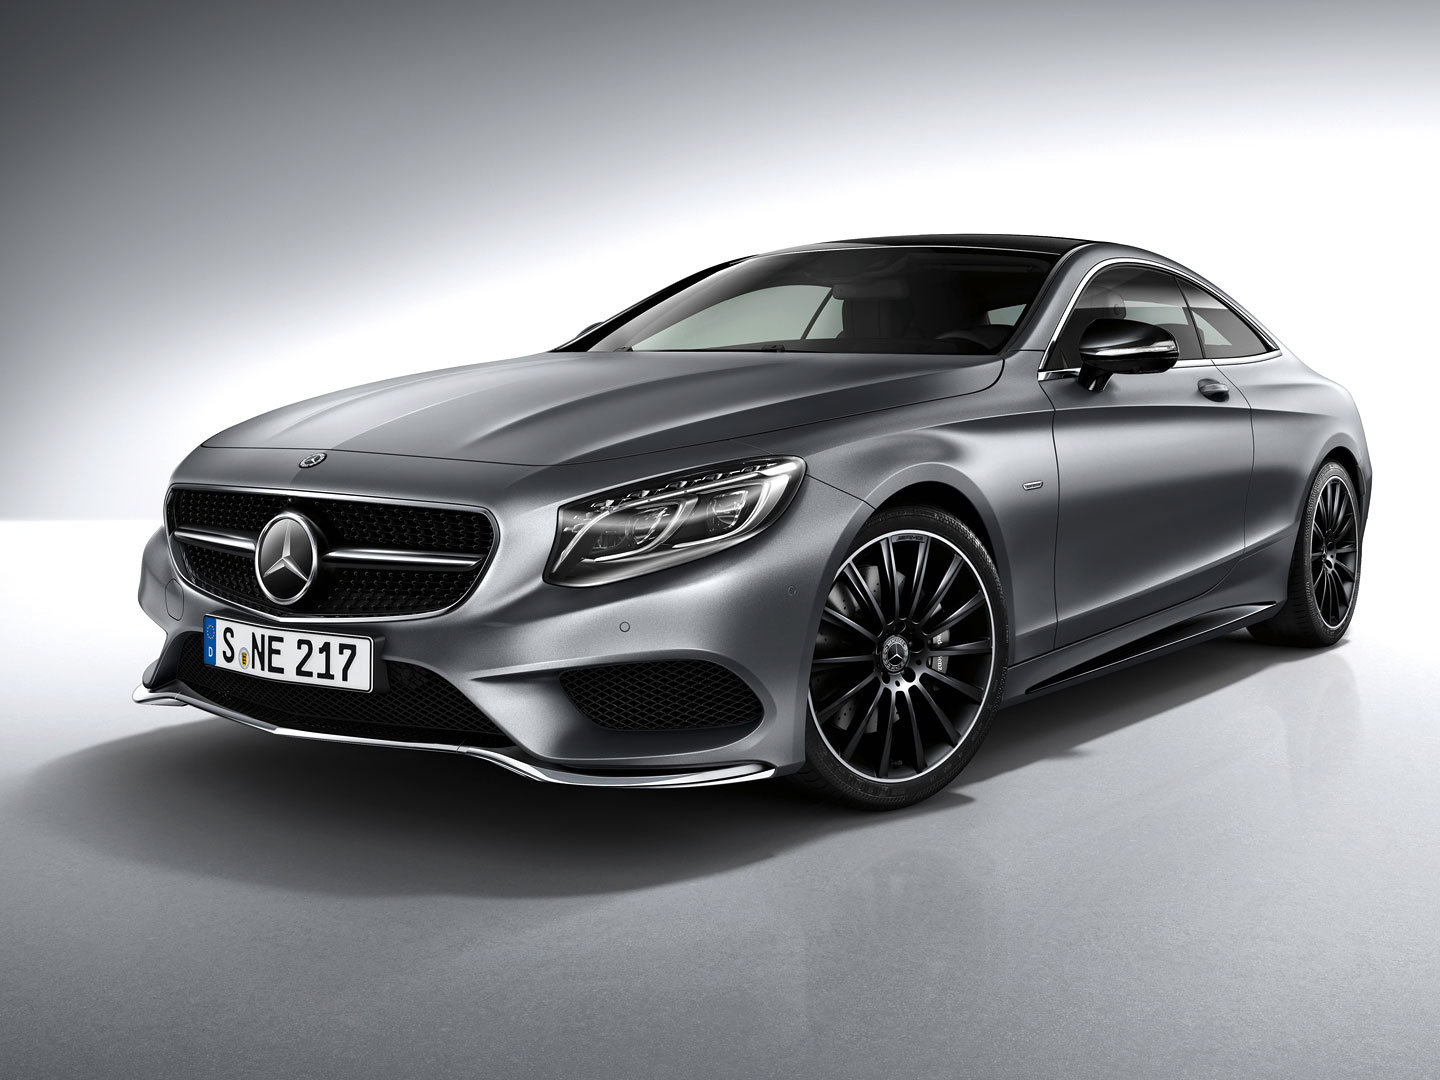 Mercedes-Benz S Coupe Night Edition (201ž)